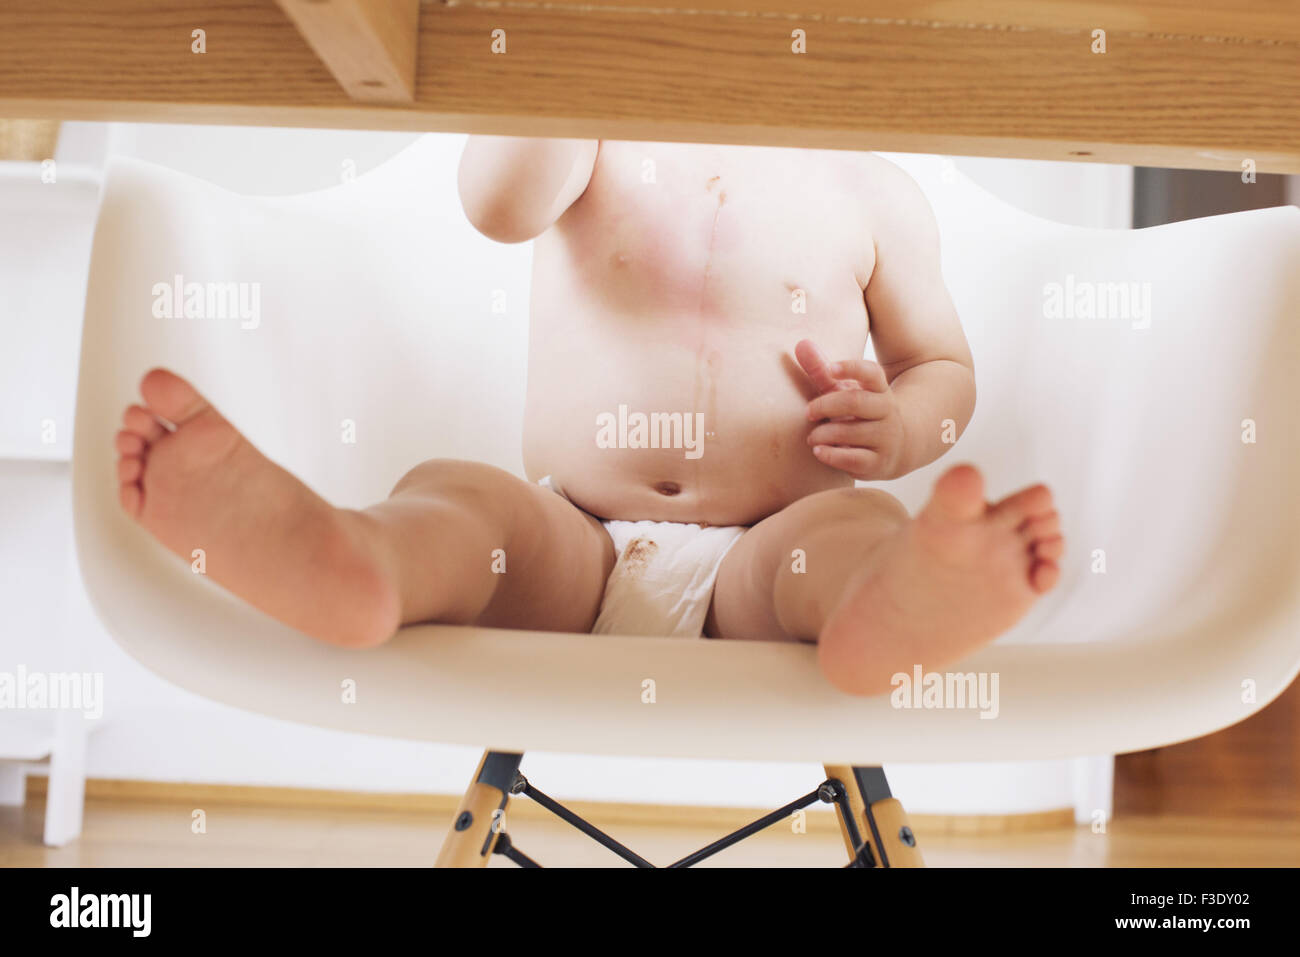 Baby sitting at table in diaper, cropped Stock Photo